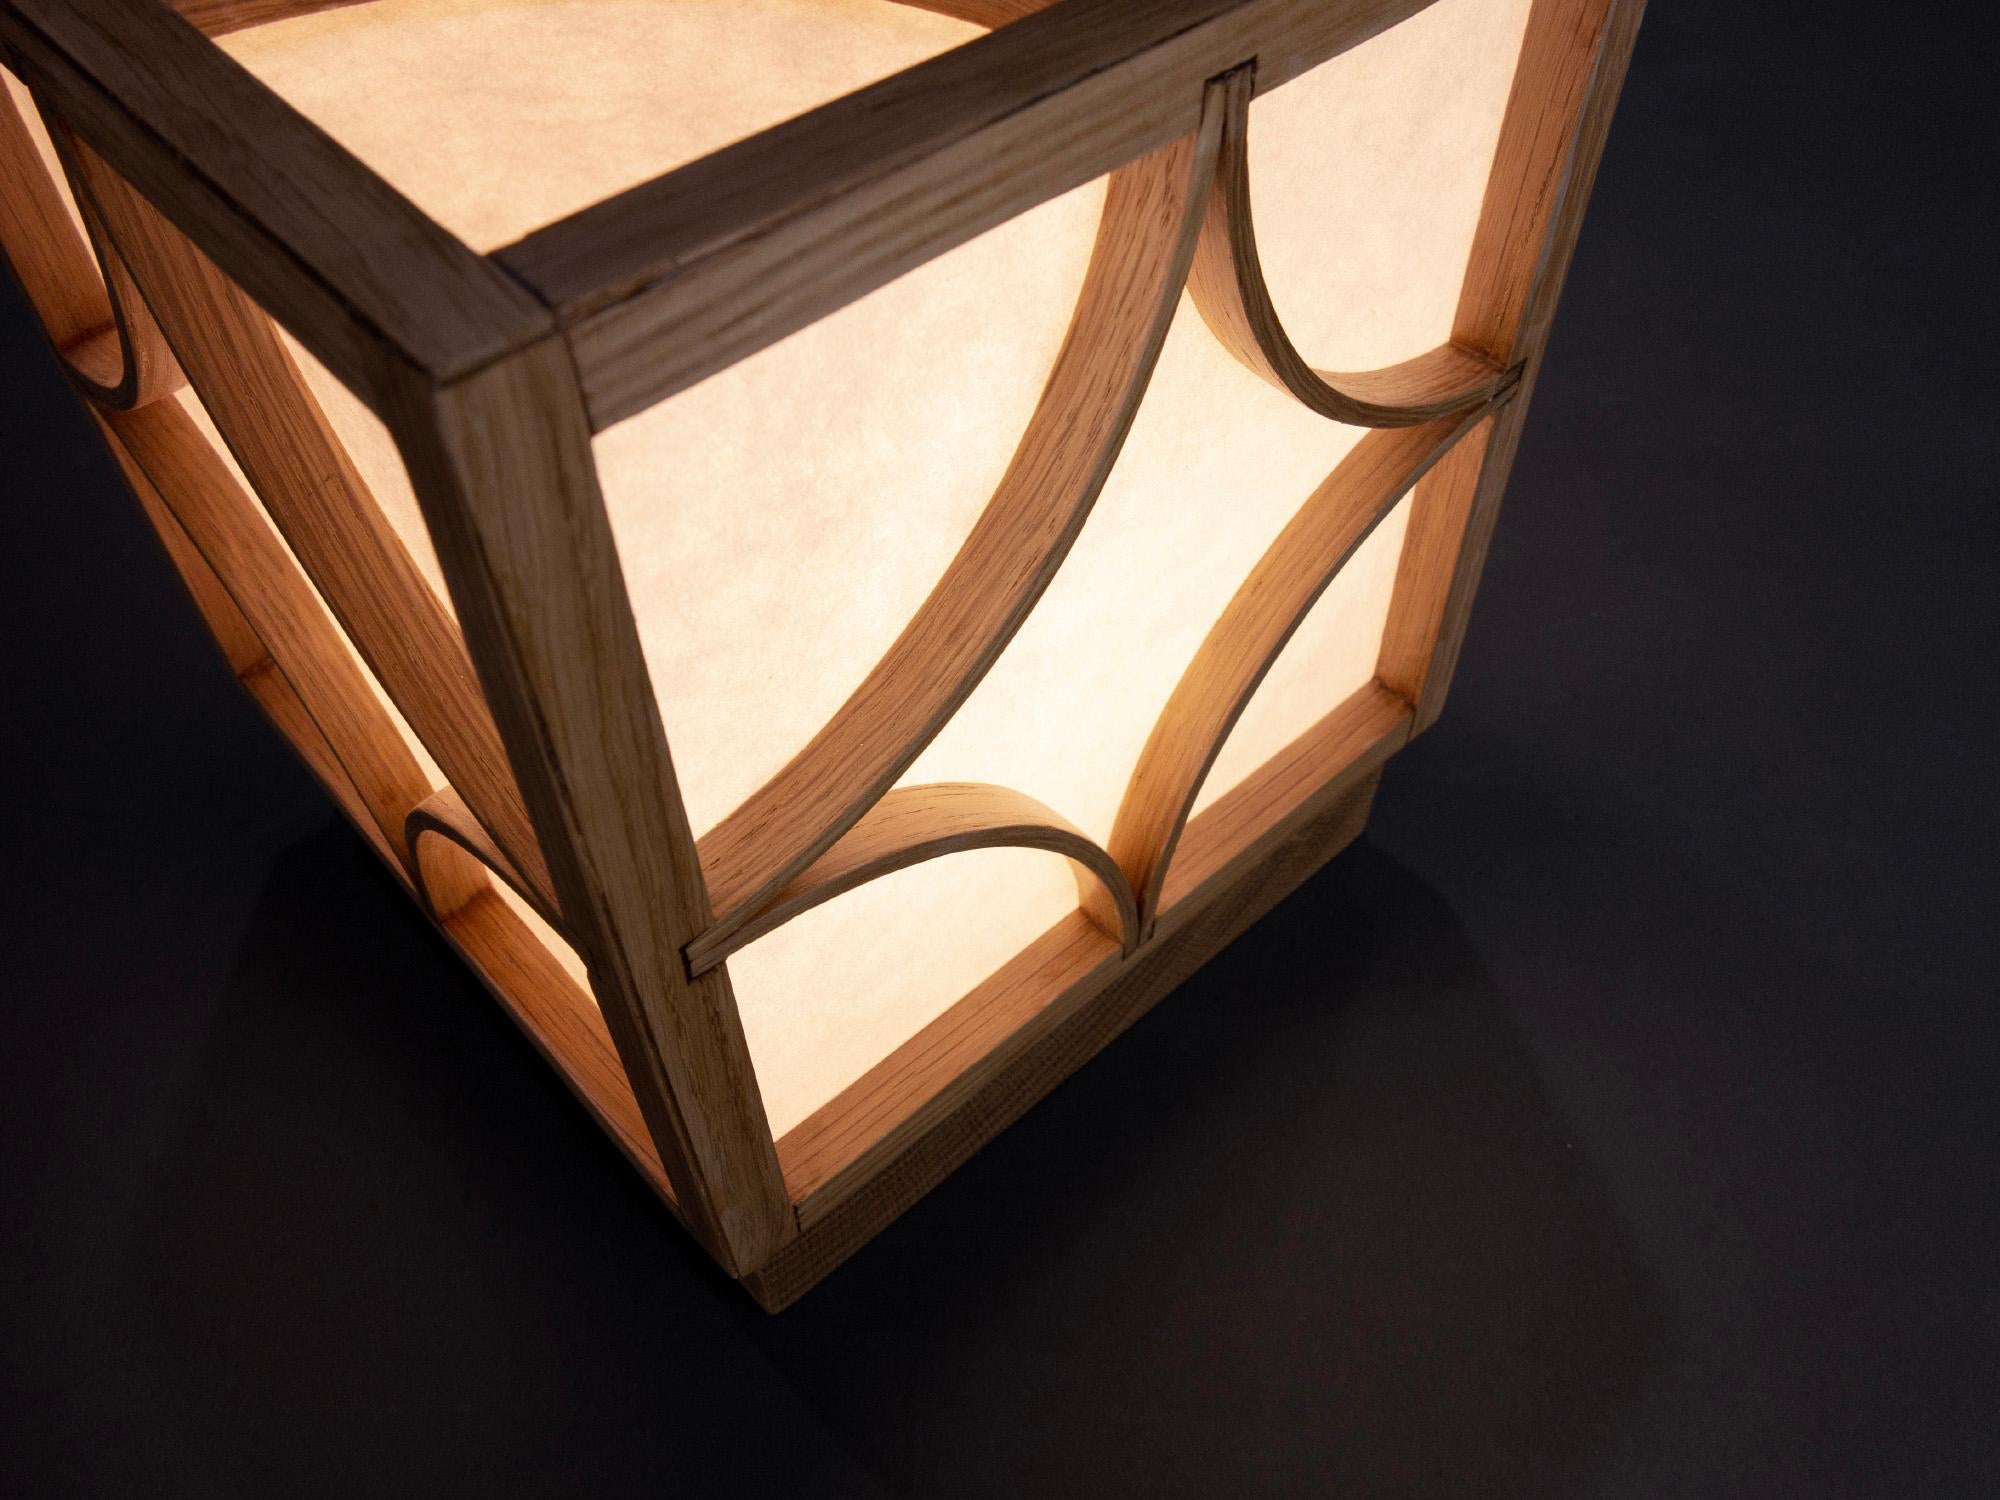 American TABLE LAMP hand-crafted using a steam bent white oak frame and Japanese shoji pa For Sale